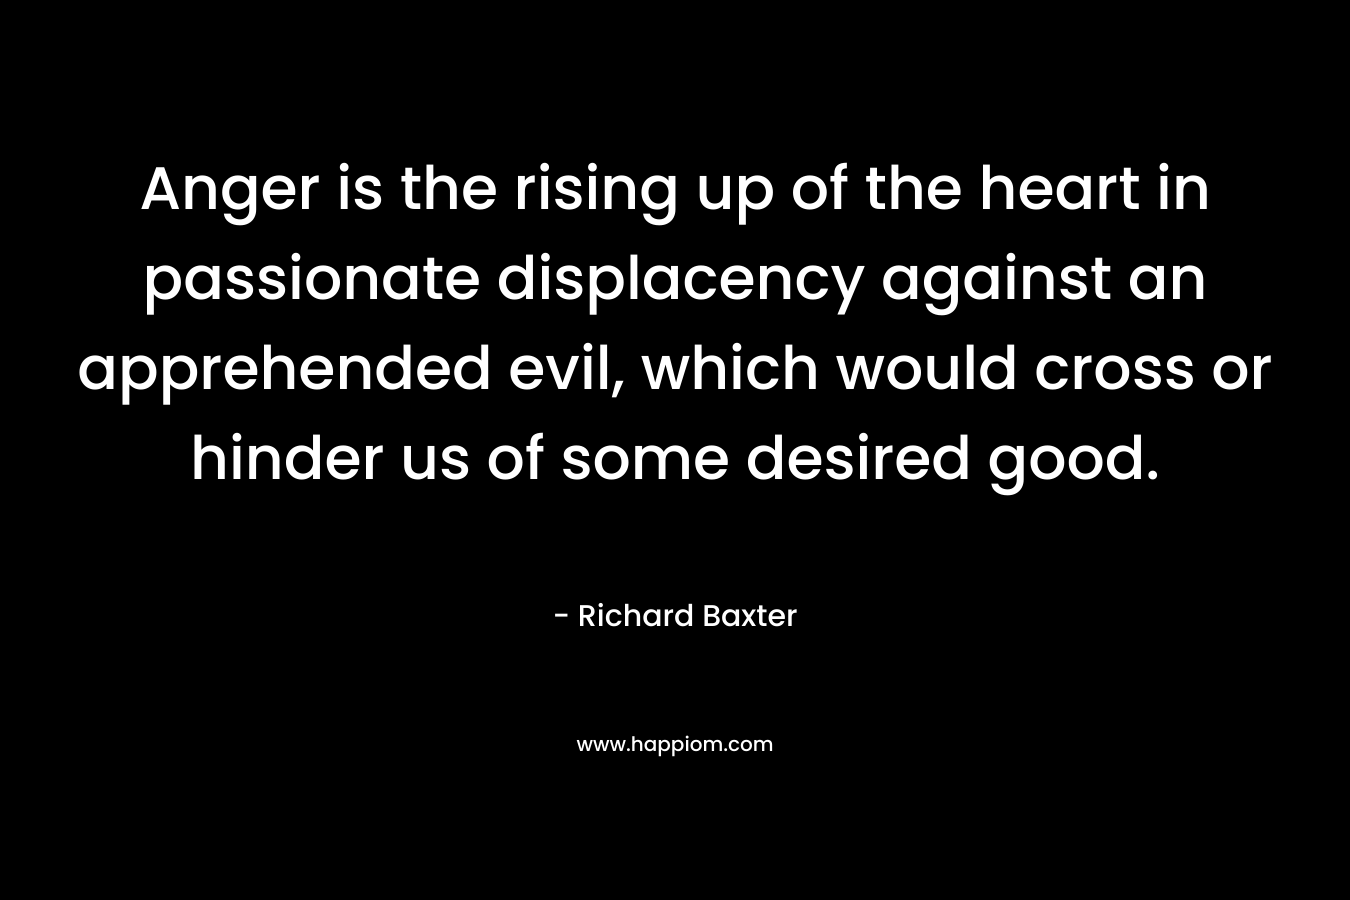 Anger is the rising up of the heart in passionate displacency against an apprehended evil, which would cross or hinder us of some desired good.